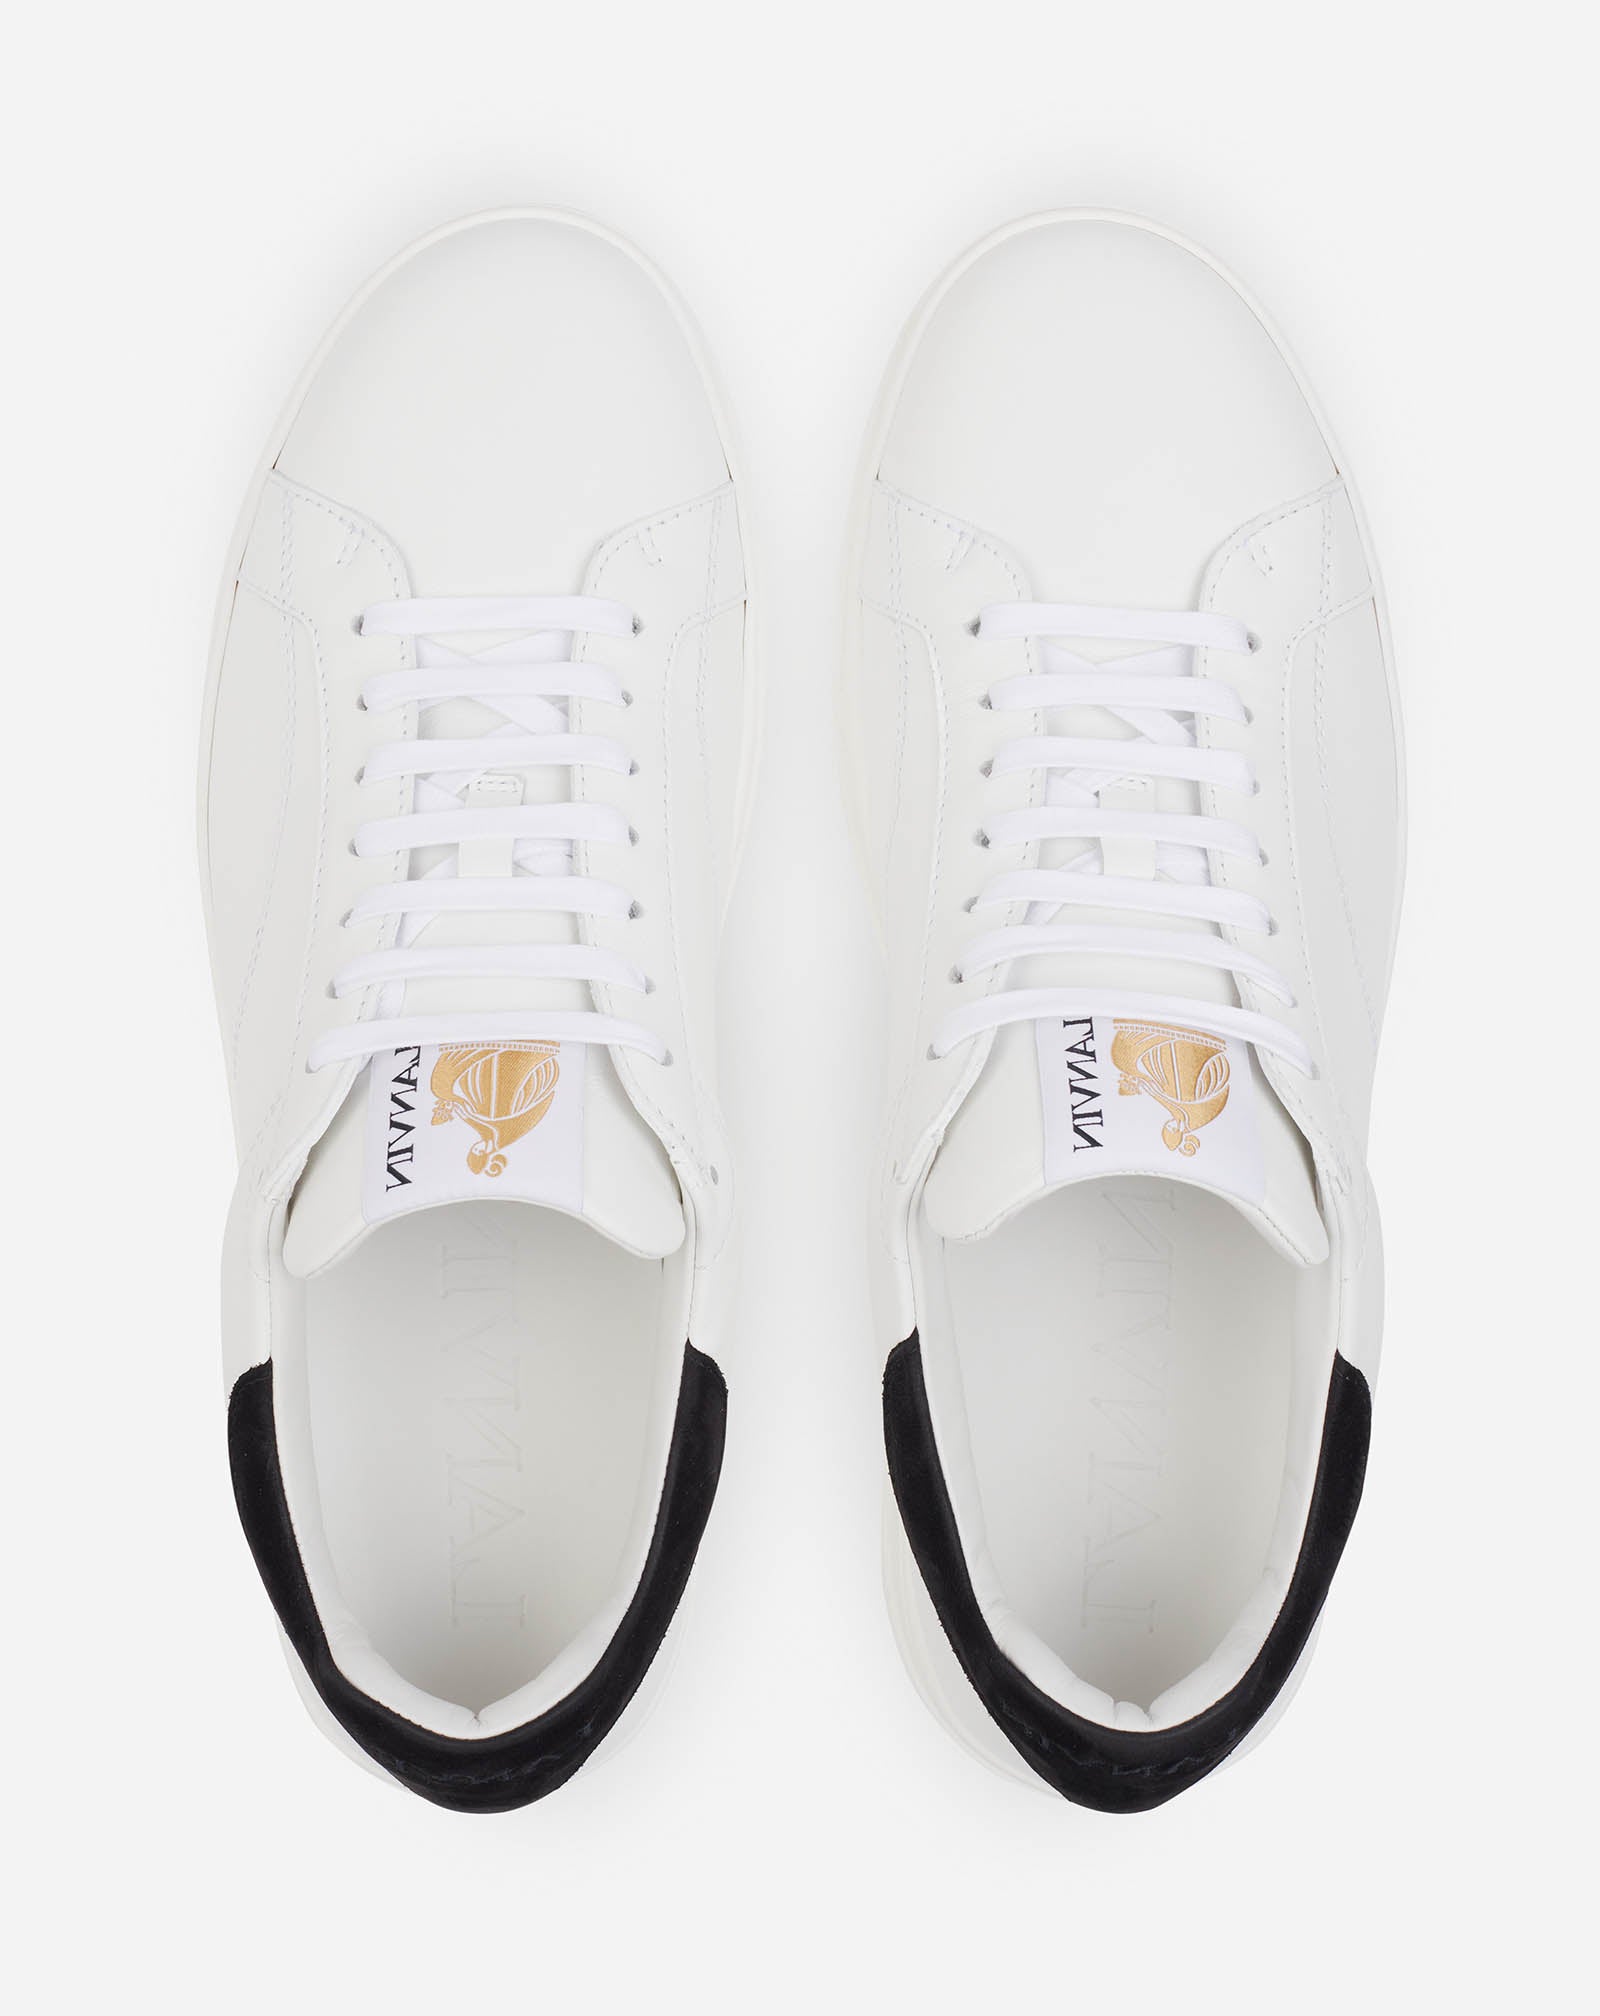 LEATHER DDB0 SNEAKERS, WHITE/BLACK